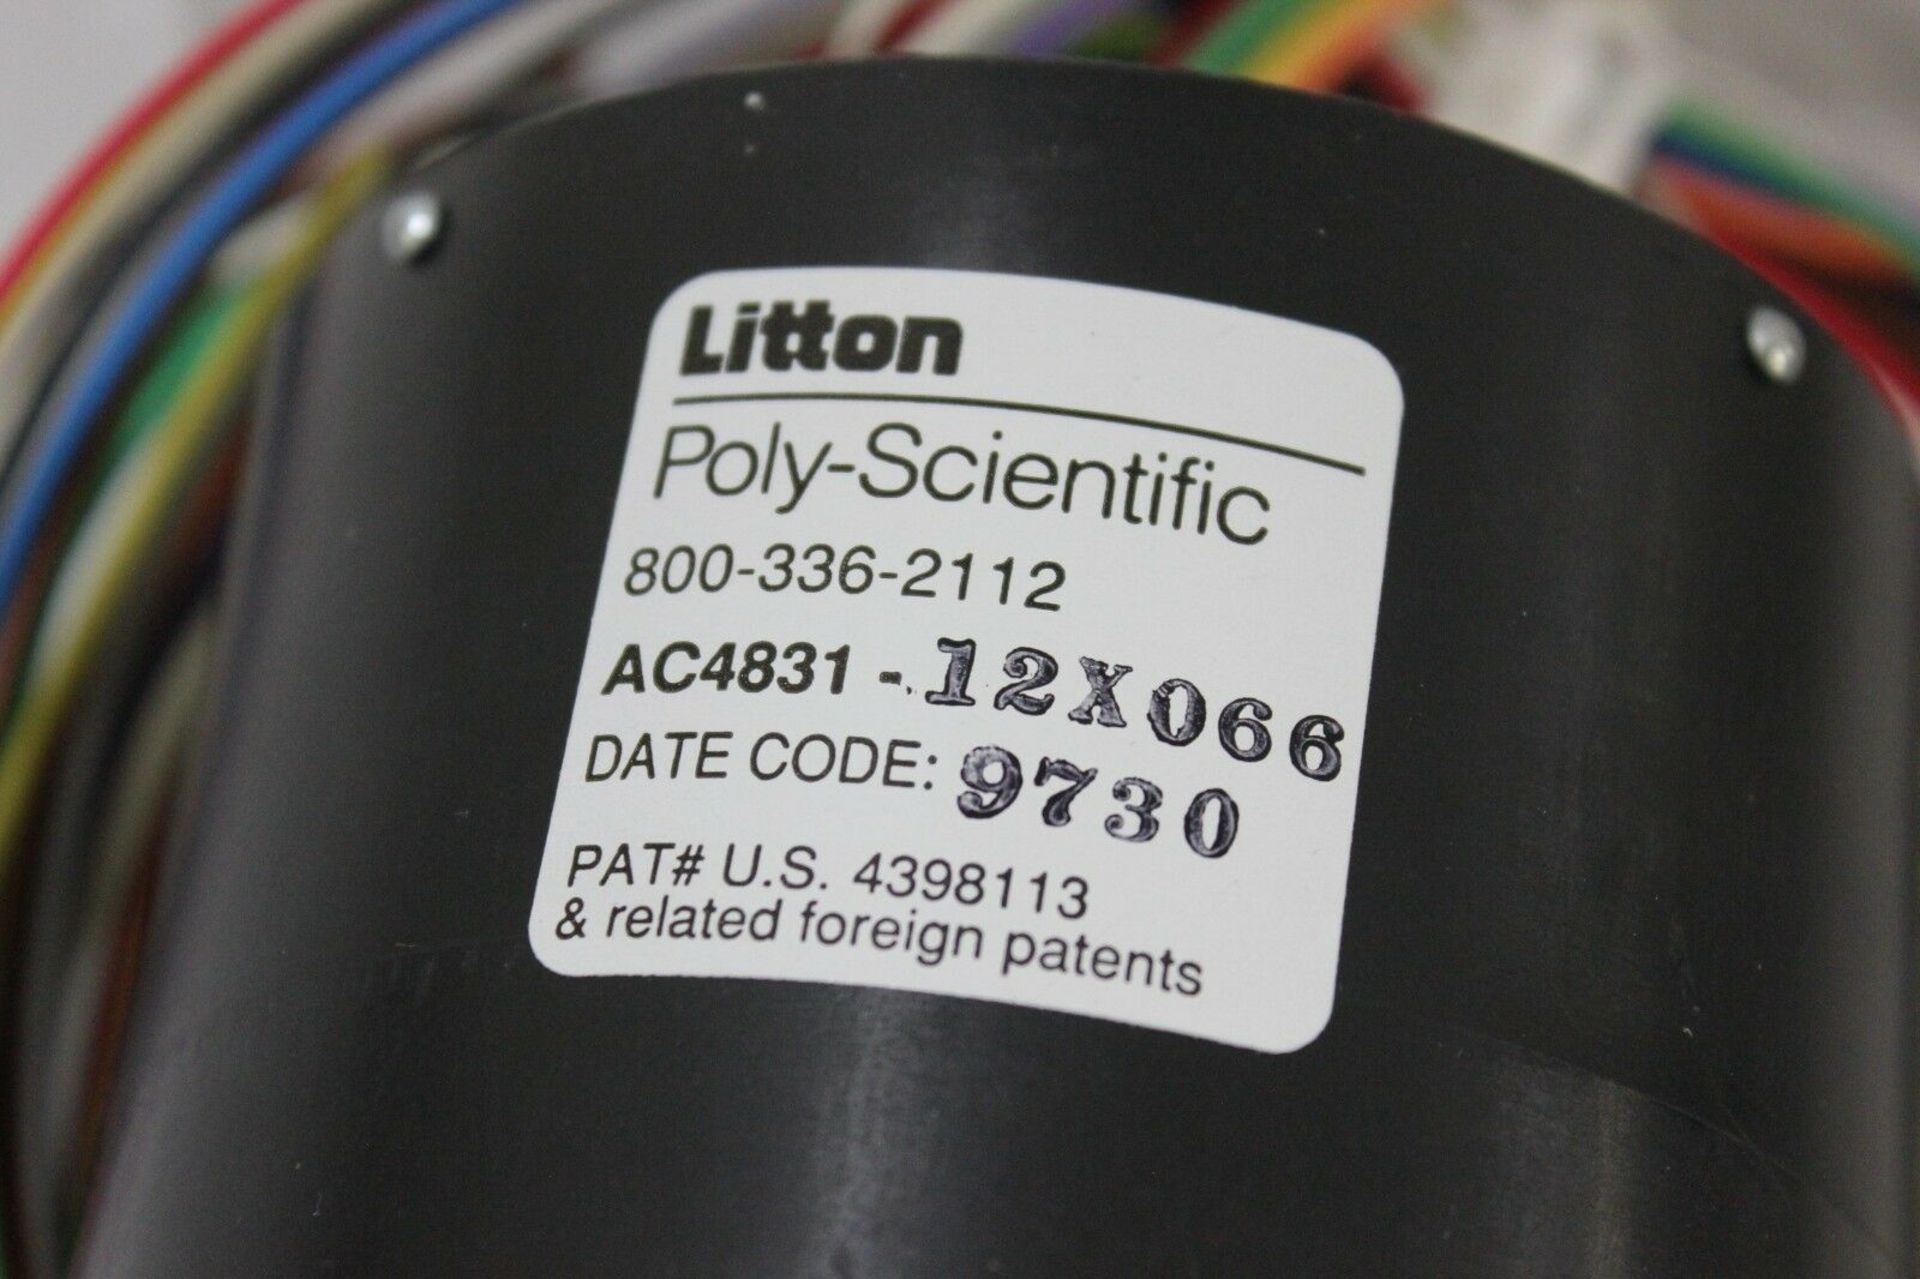 New Litton Poly Scientific 12 Way Slip Ring Slipring Assembly - Image 4 of 4